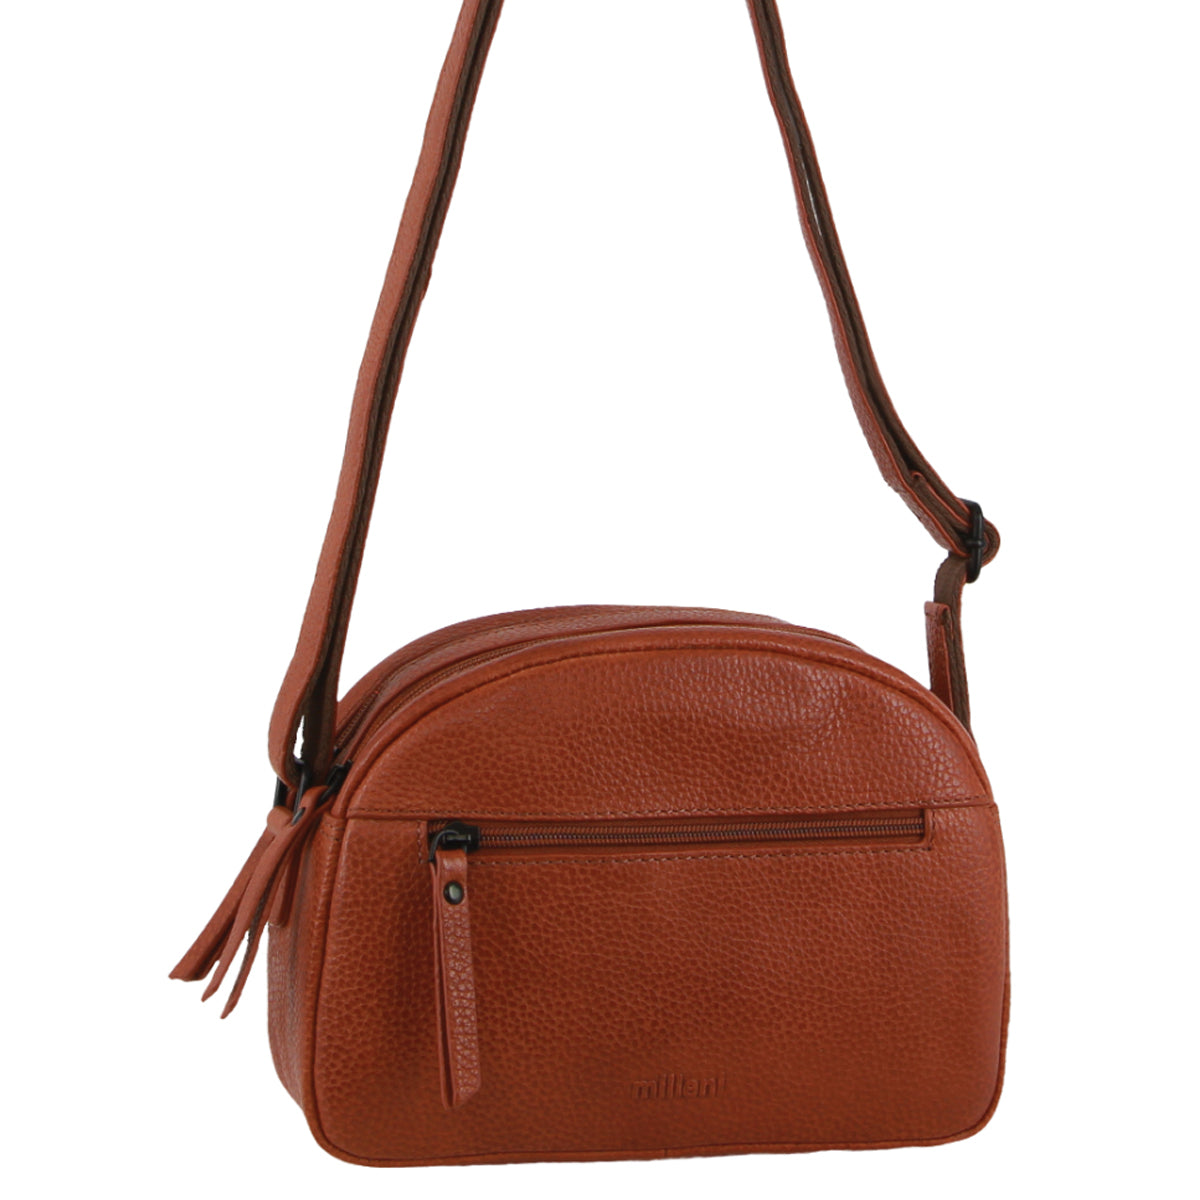 Milleni - NL3869 Small rounded leather sidebag - Cognac-3